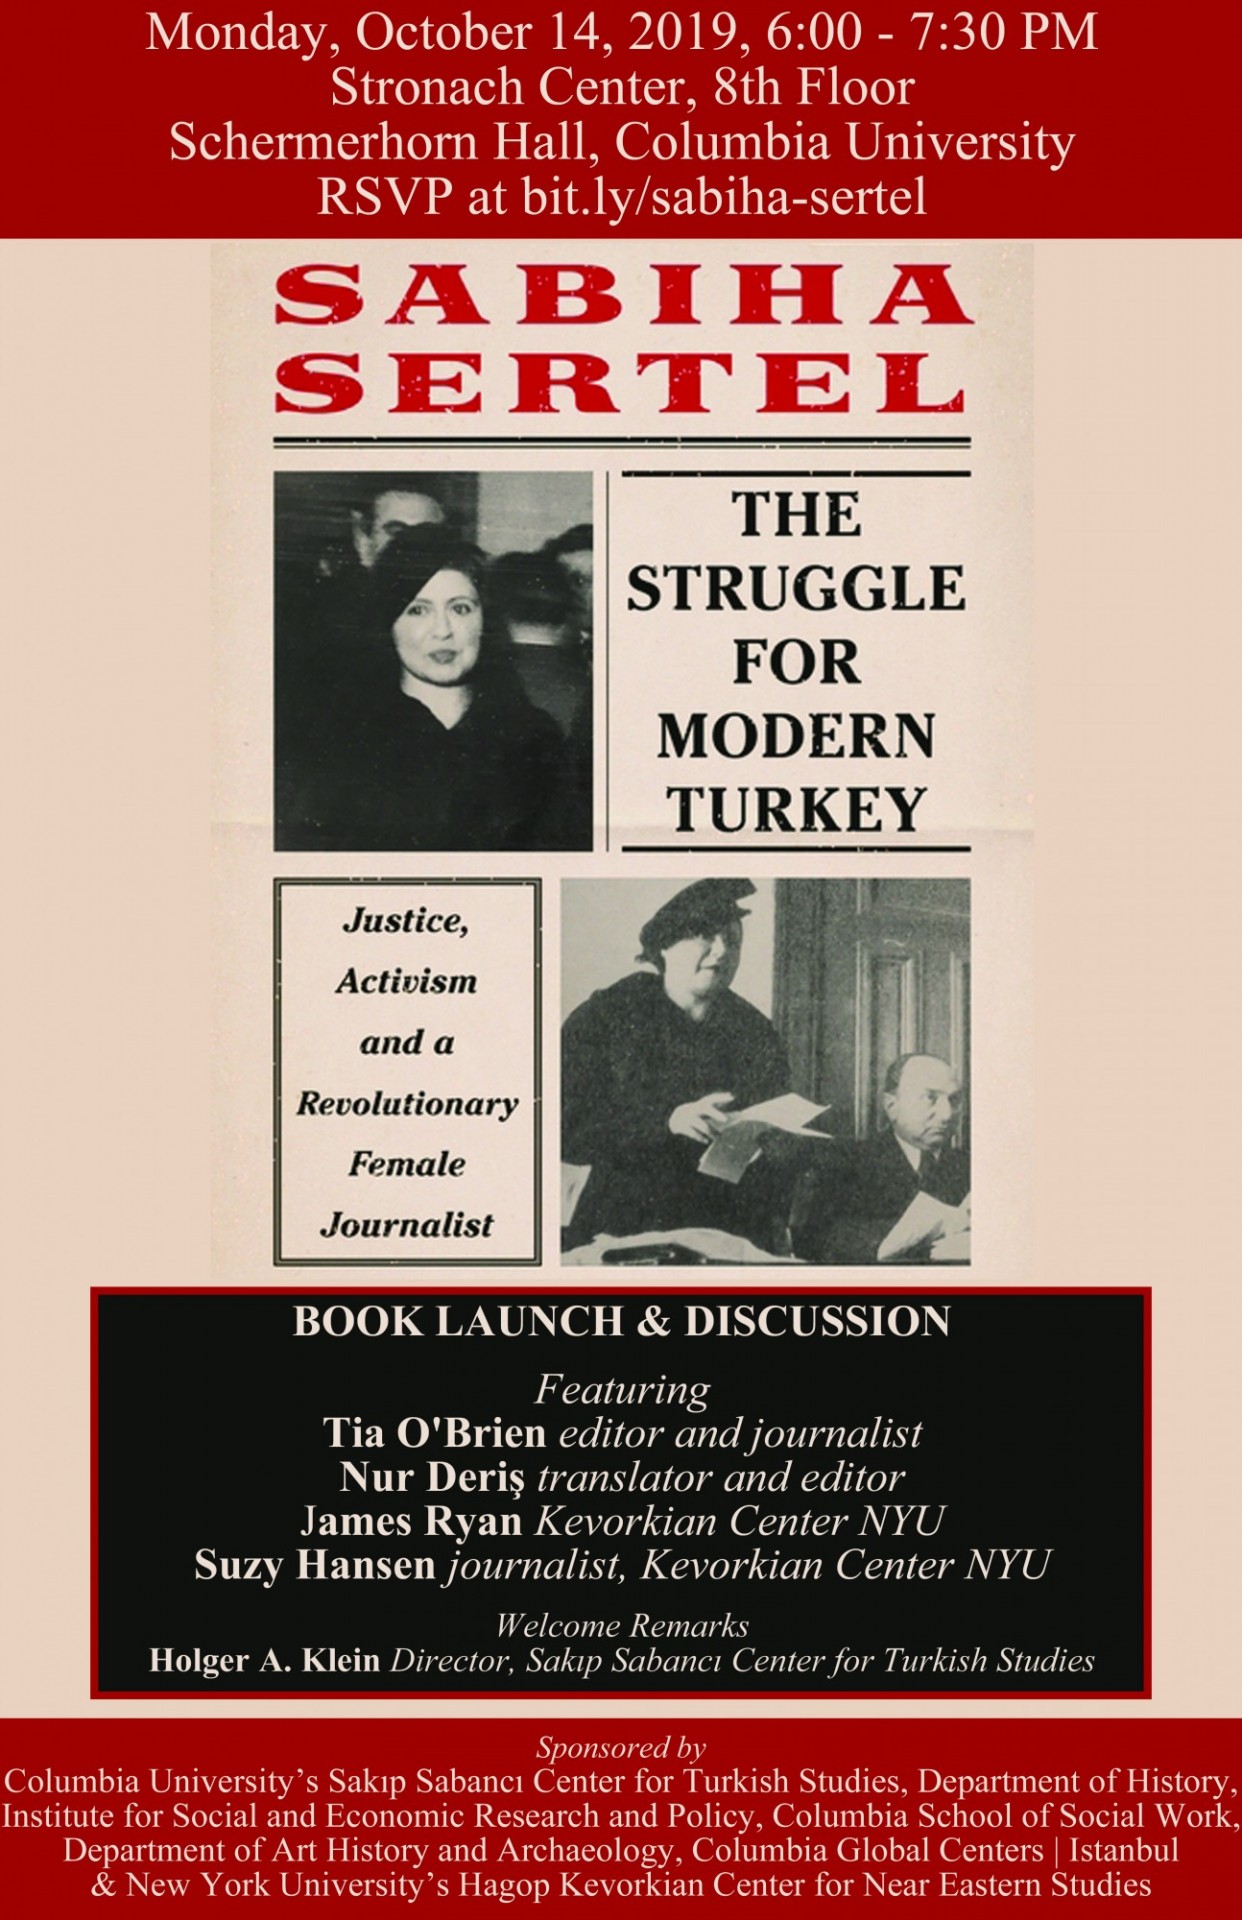 Flyer advertising book launch event for The STrug